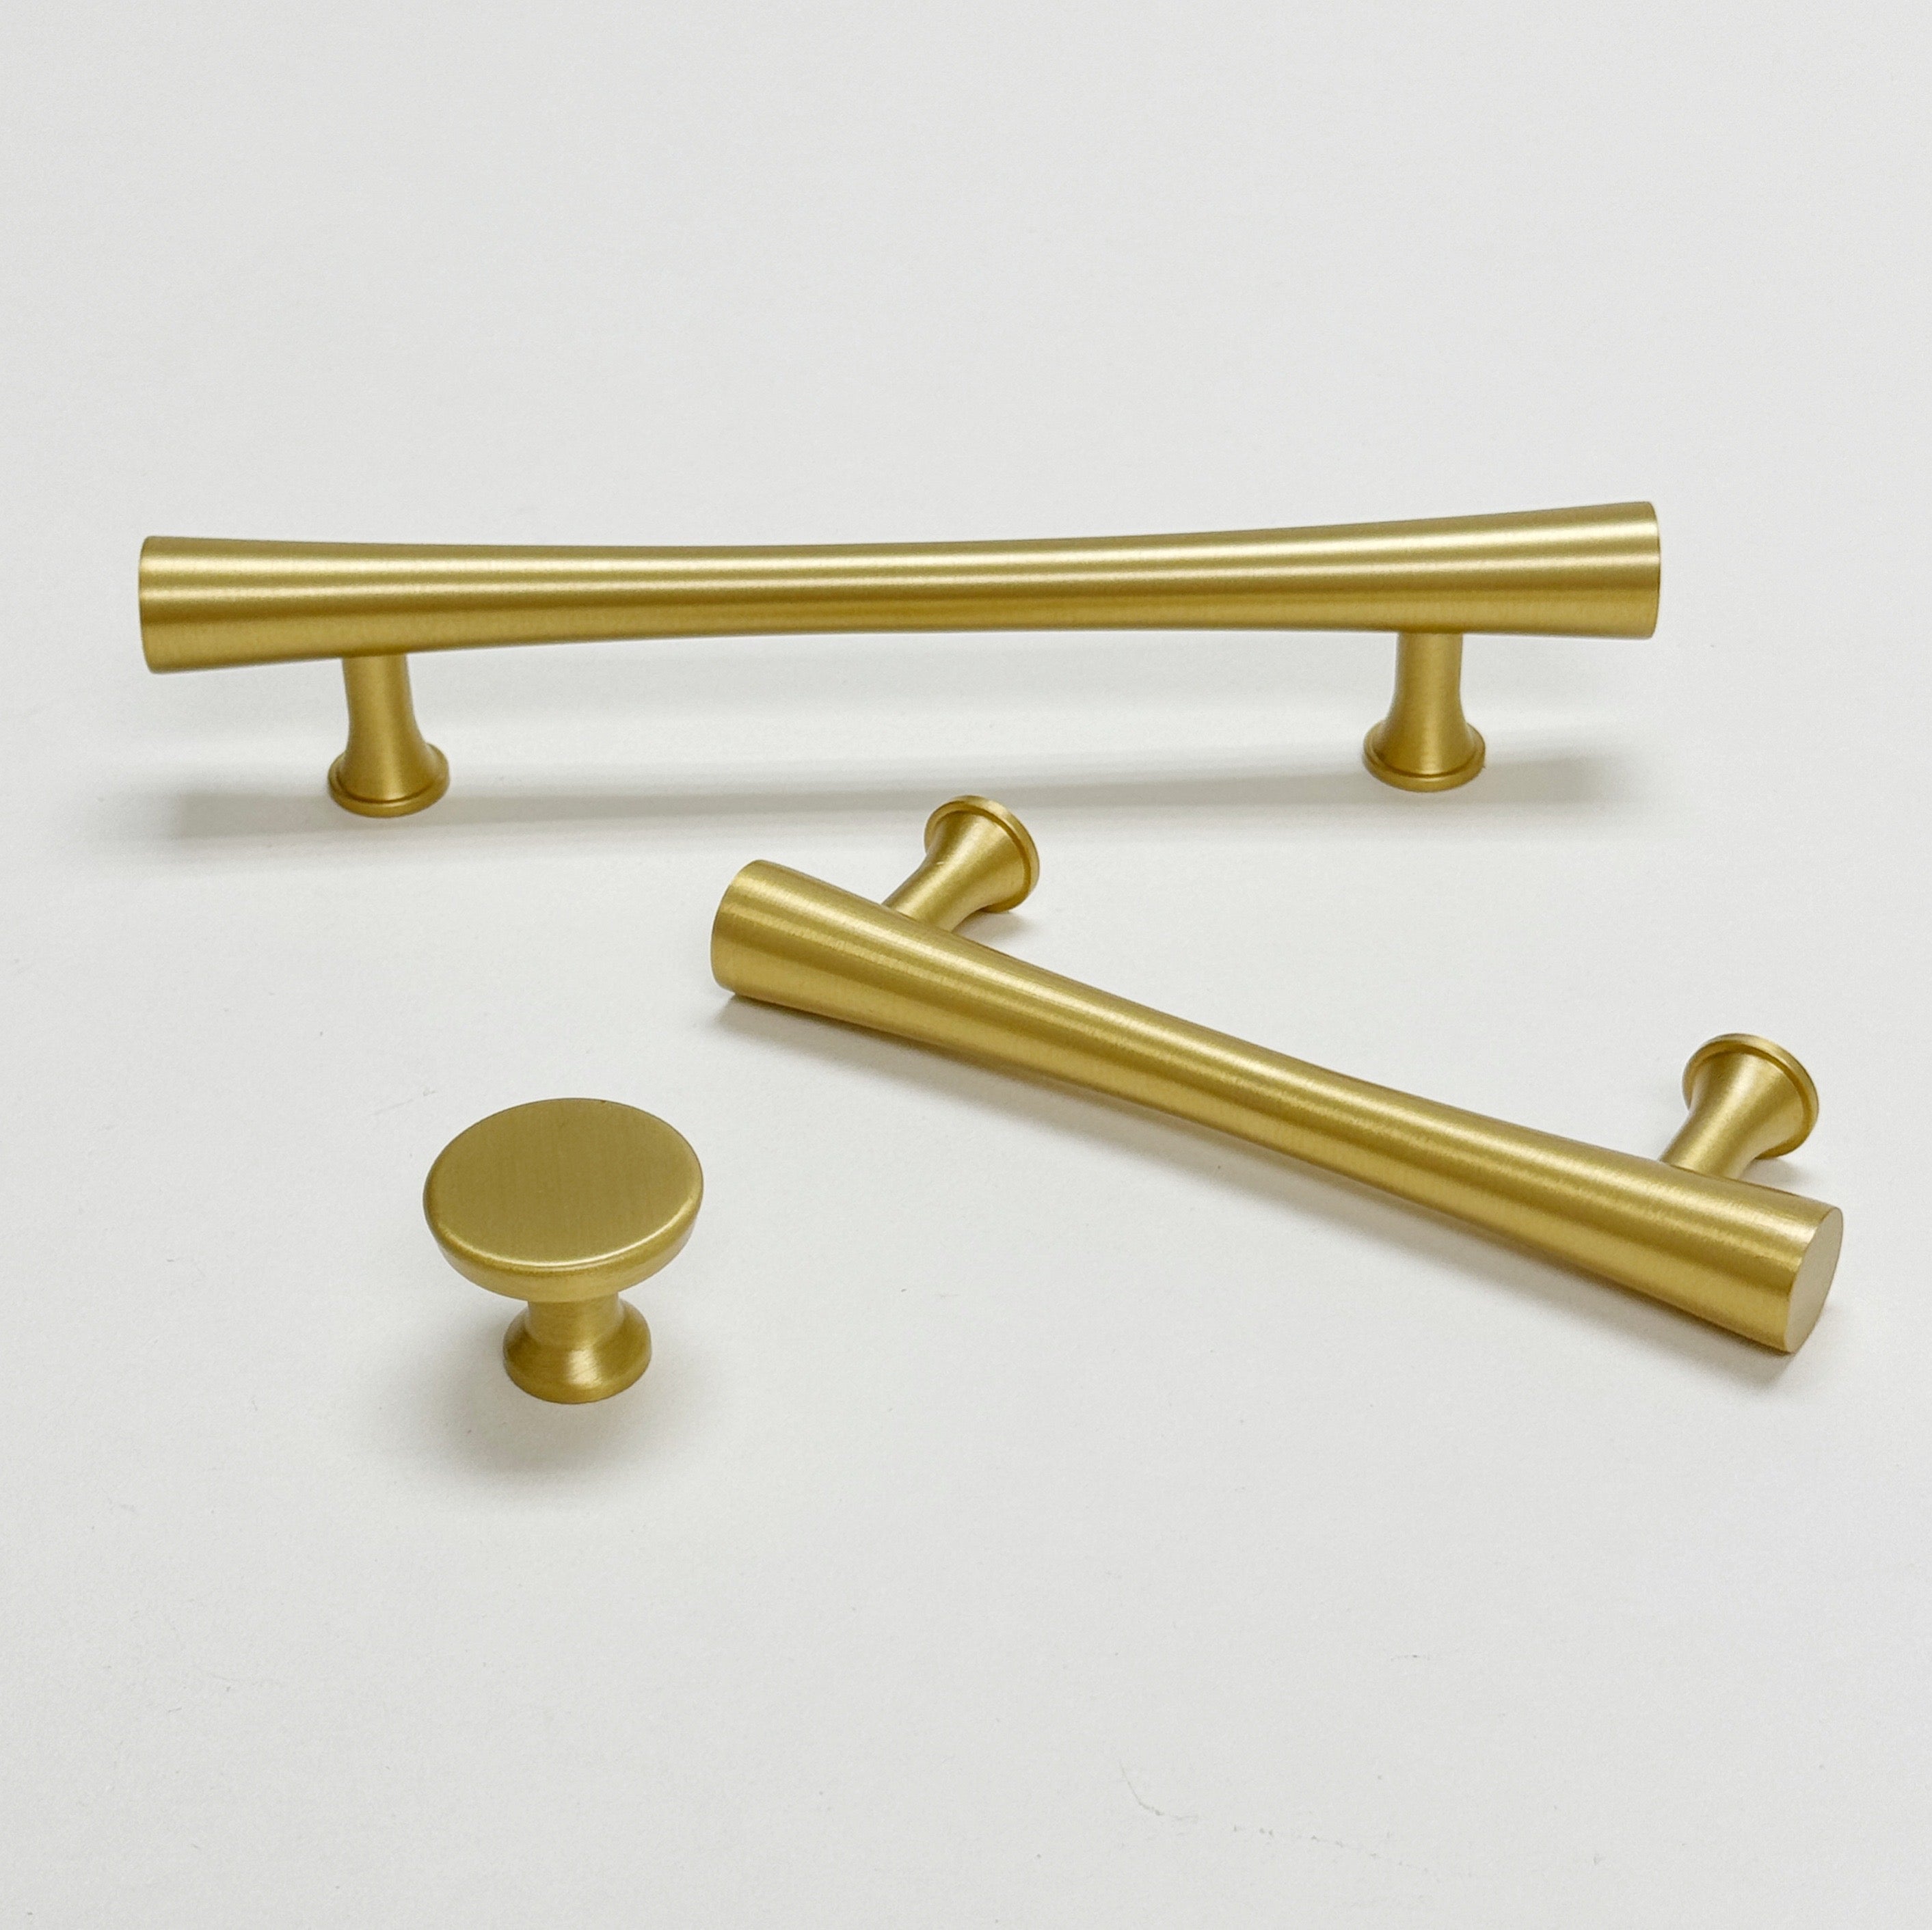 Satin Brass Cabinet Hardware Collin Drawer Pulls and Cabinet Knobs